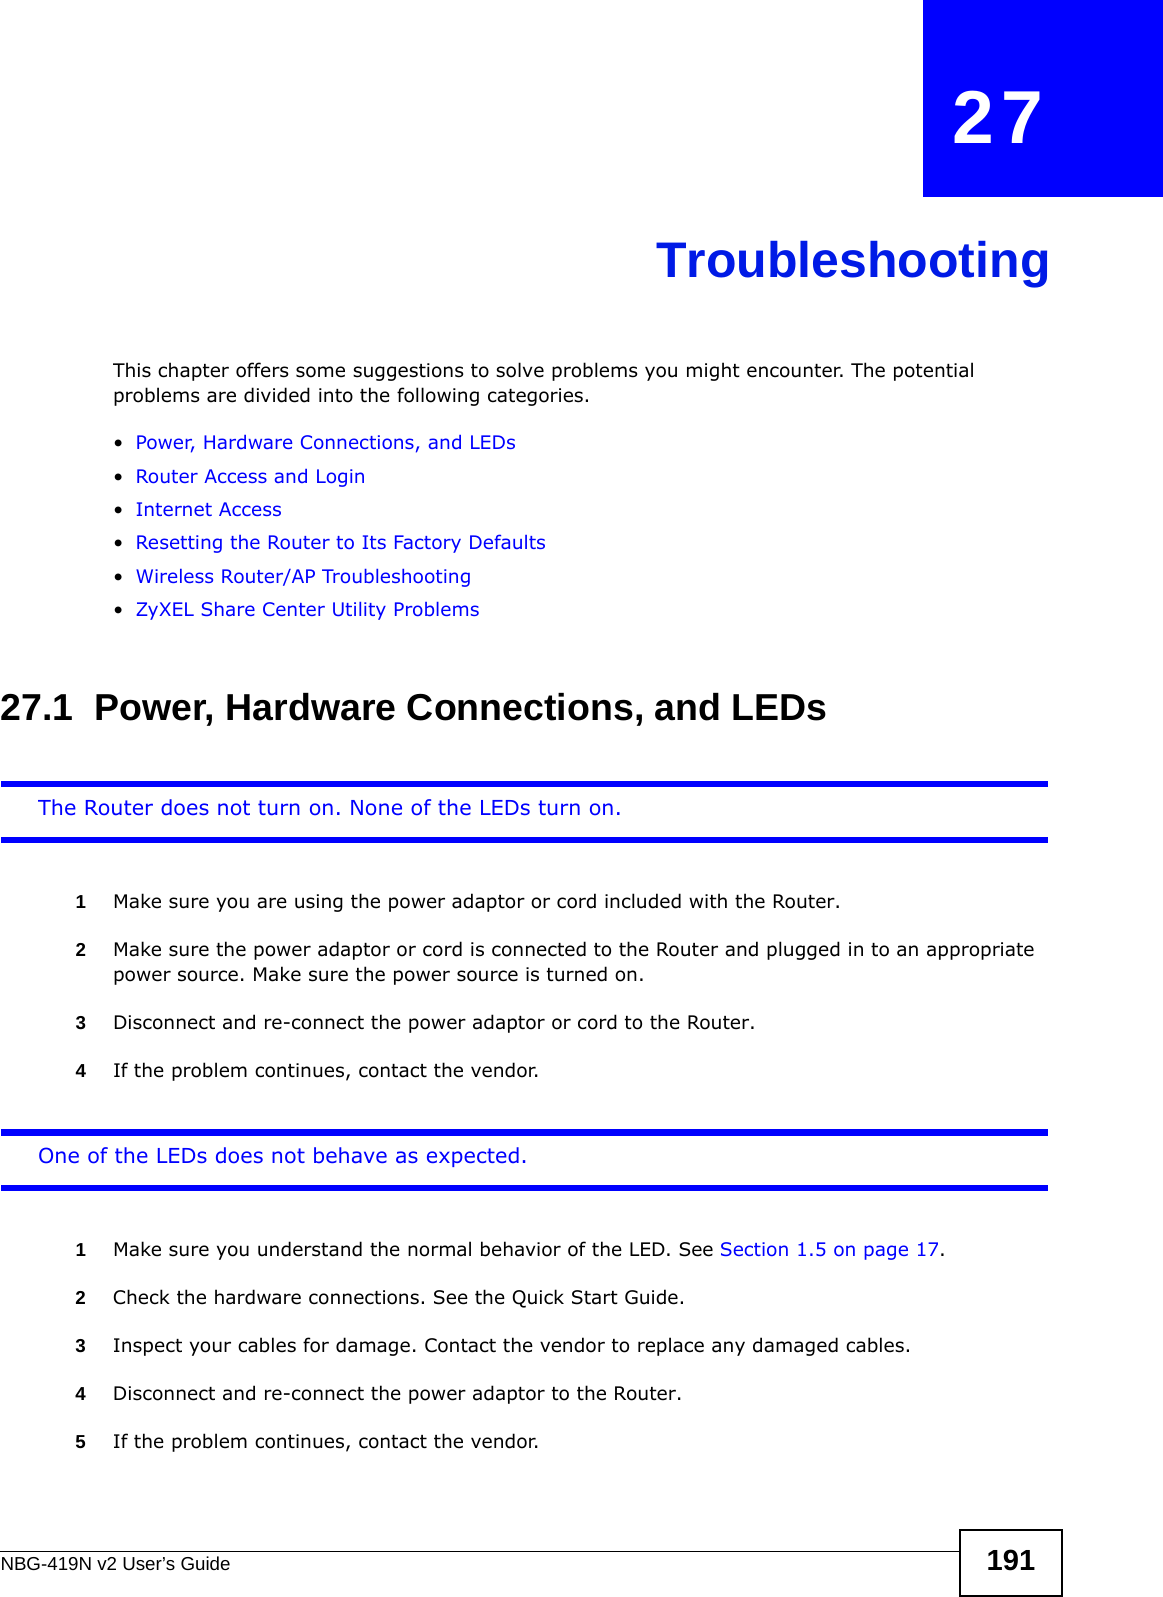 NBG-419N v2 User’s Guide 191CHAPTER   27TroubleshootingThis chapter offers some suggestions to solve problems you might encounter. The potential problems are divided into the following categories. •Power, Hardware Connections, and LEDs•Router Access and Login•Internet Access•Resetting the Router to Its Factory Defaults•Wireless Router/AP Troubleshooting•ZyXEL Share Center Utility Problems27.1  Power, Hardware Connections, and LEDsThe Router does not turn on. None of the LEDs turn on.1Make sure you are using the power adaptor or cord included with the Router.2Make sure the power adaptor or cord is connected to the Router and plugged in to an appropriate power source. Make sure the power source is turned on.3Disconnect and re-connect the power adaptor or cord to the Router.4If the problem continues, contact the vendor.One of the LEDs does not behave as expected.1Make sure you understand the normal behavior of the LED. See Section 1.5 on page 17.2Check the hardware connections. See the Quick Start Guide. 3Inspect your cables for damage. Contact the vendor to replace any damaged cables.4Disconnect and re-connect the power adaptor to the Router. 5If the problem continues, contact the vendor.